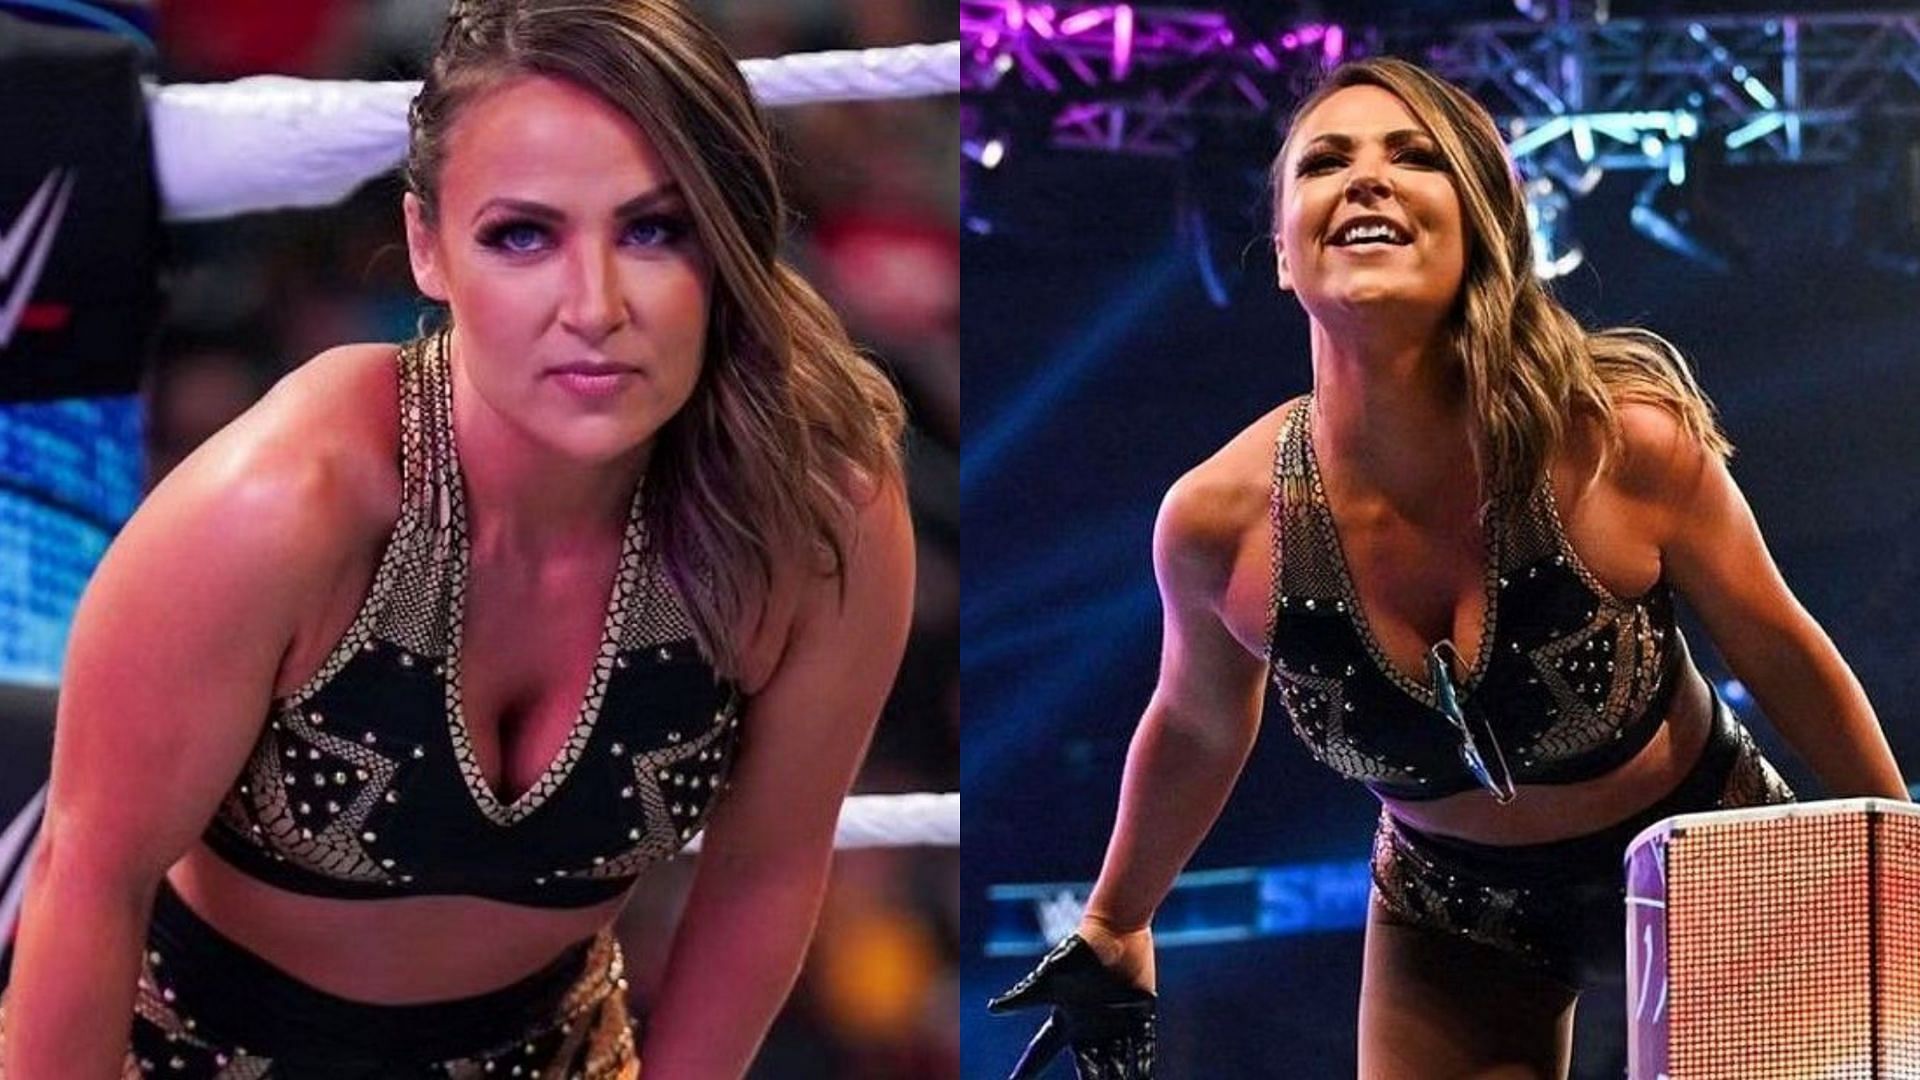 Emma made her return to WWE last Friday on SmackDown